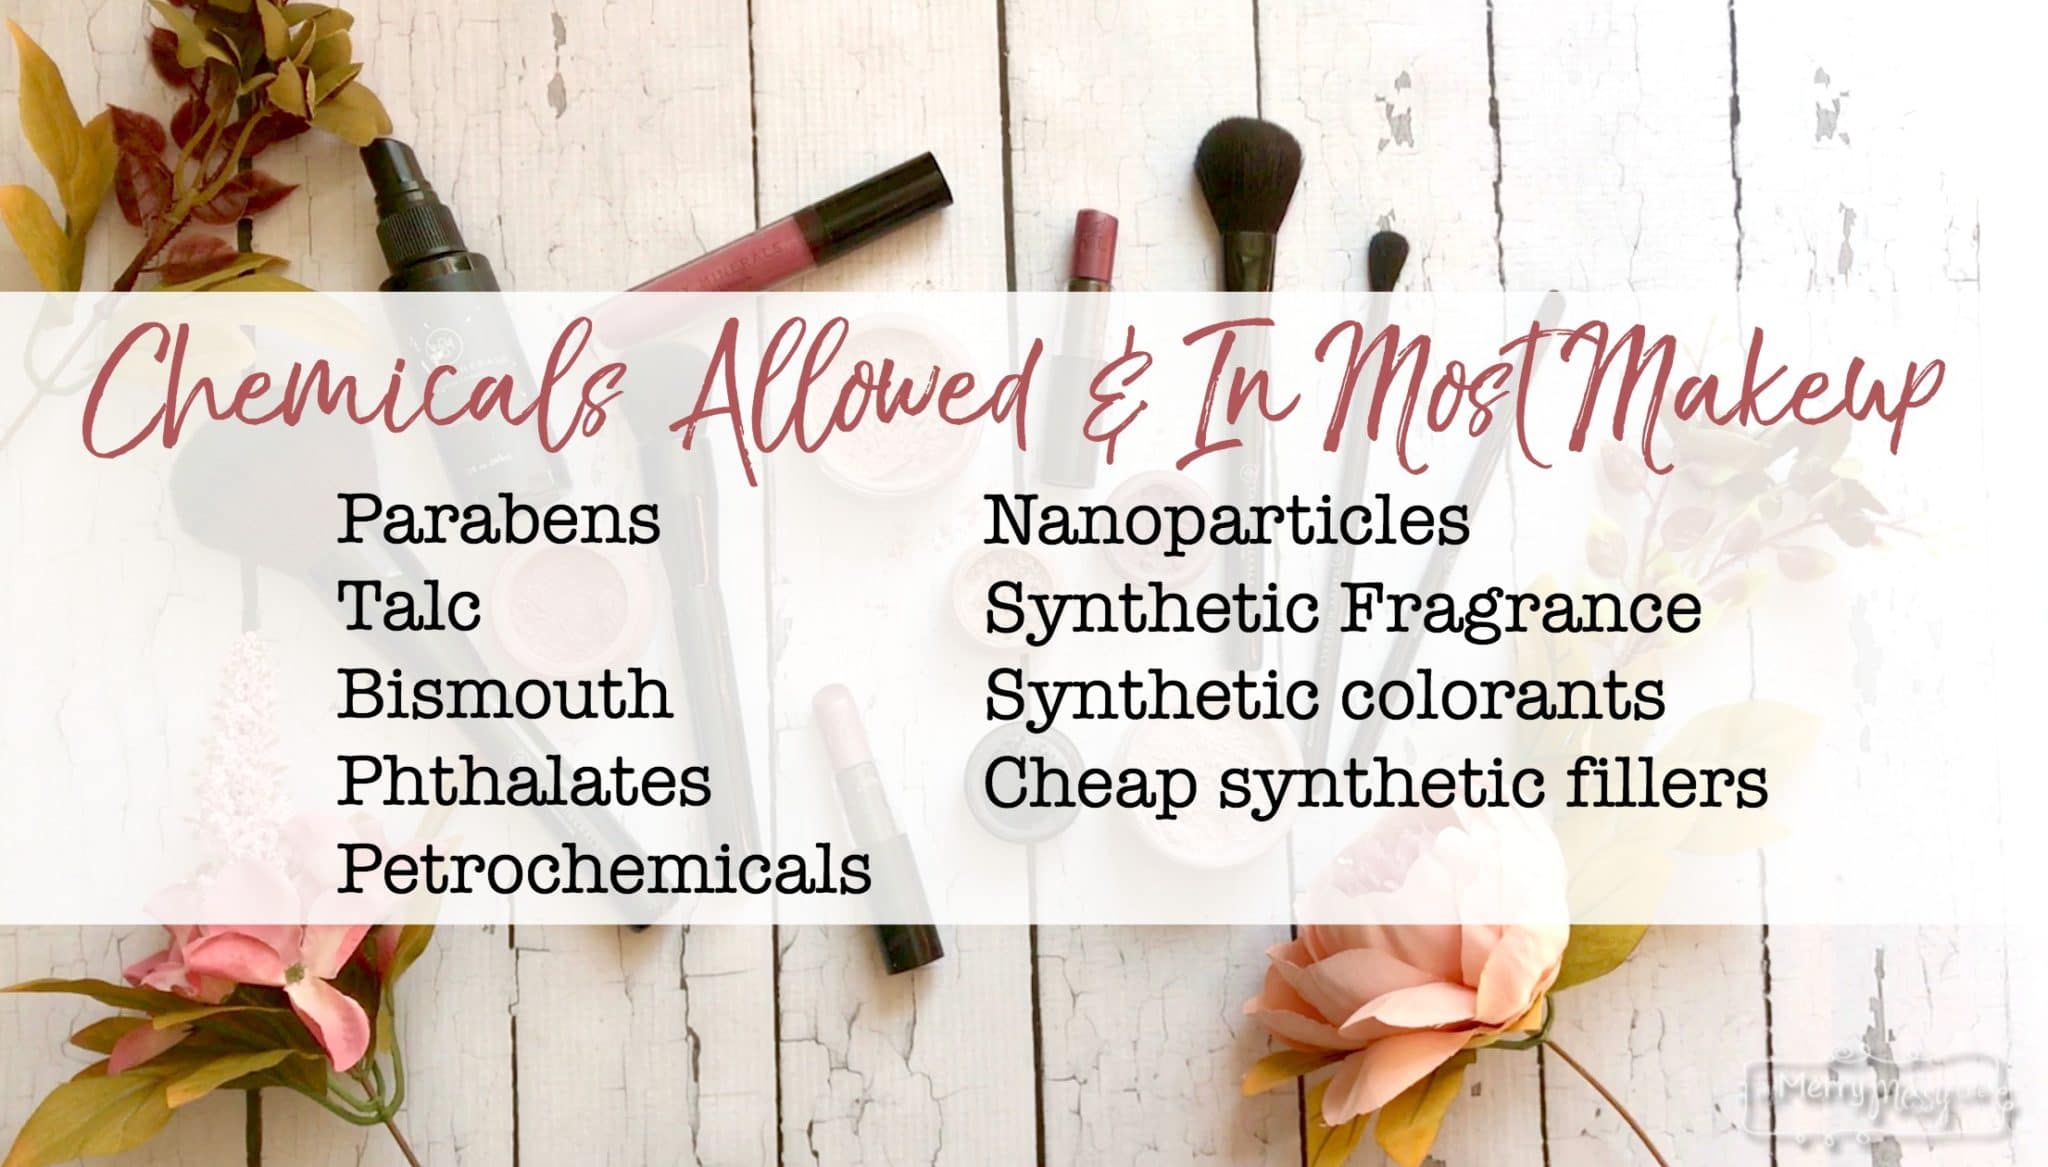 Chemicals Commonly Allowed In Makeup